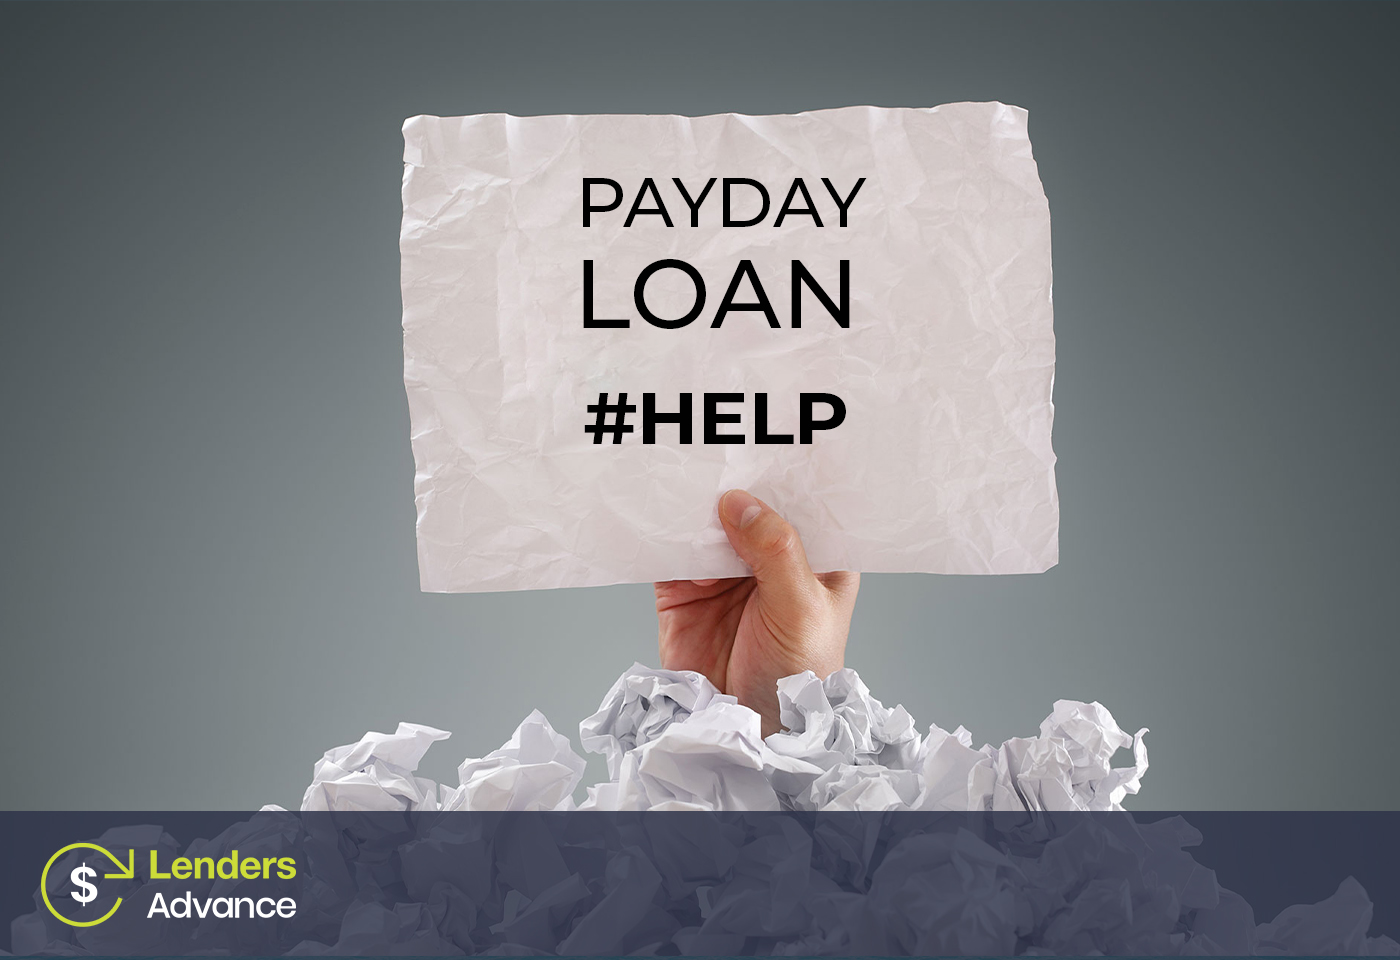 Real Payday Loan Help